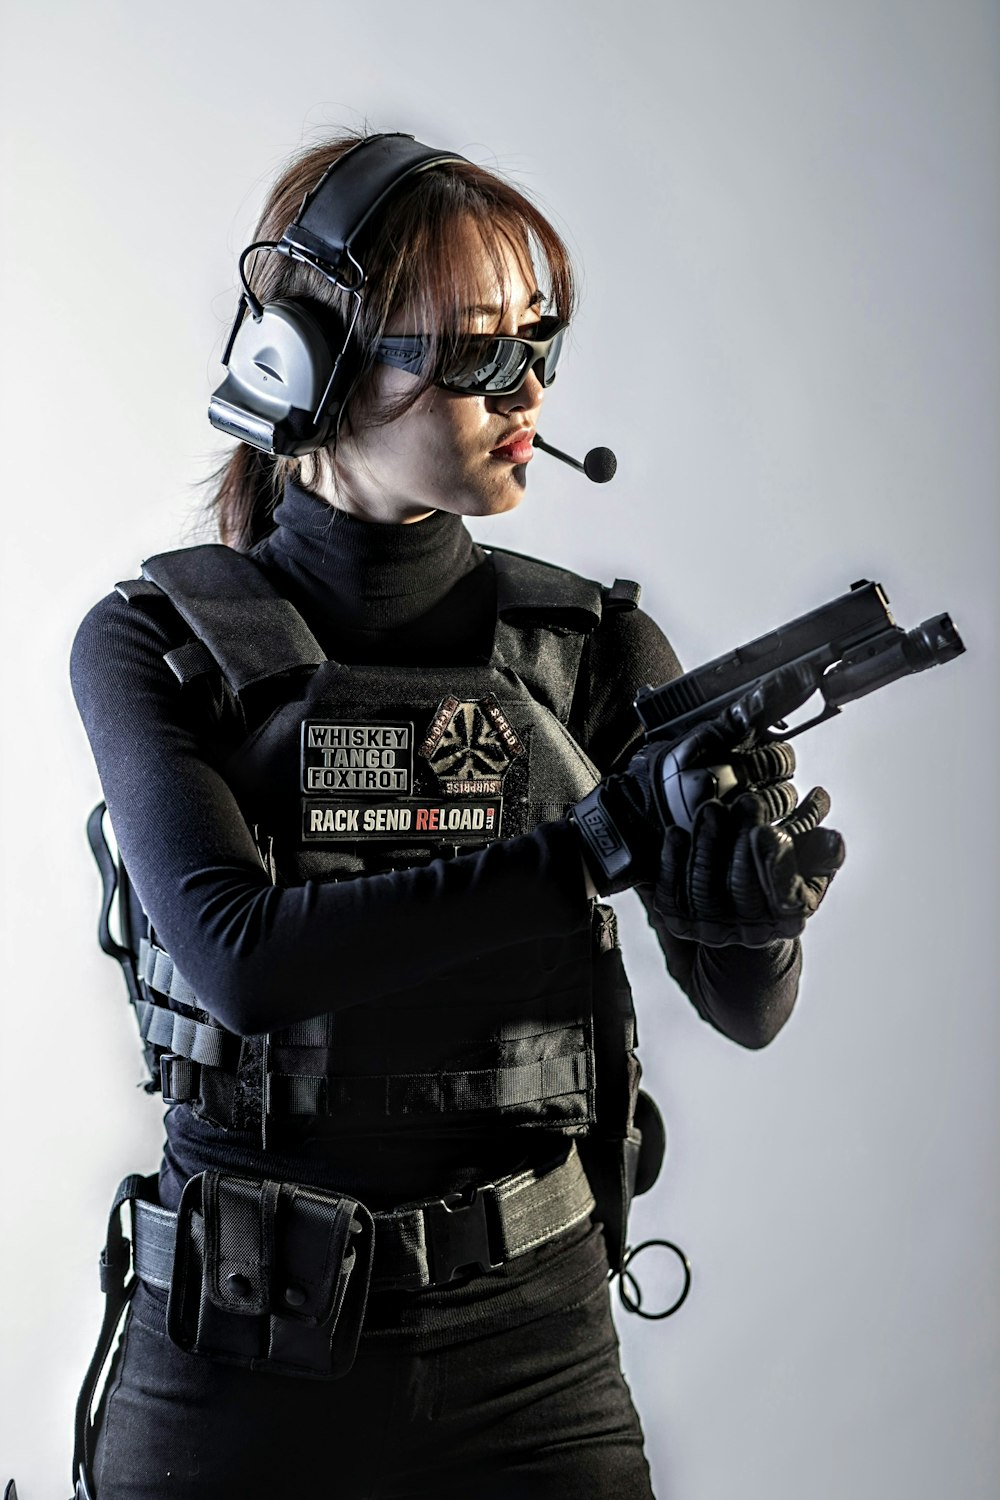 a woman in a black outfit holding a gun